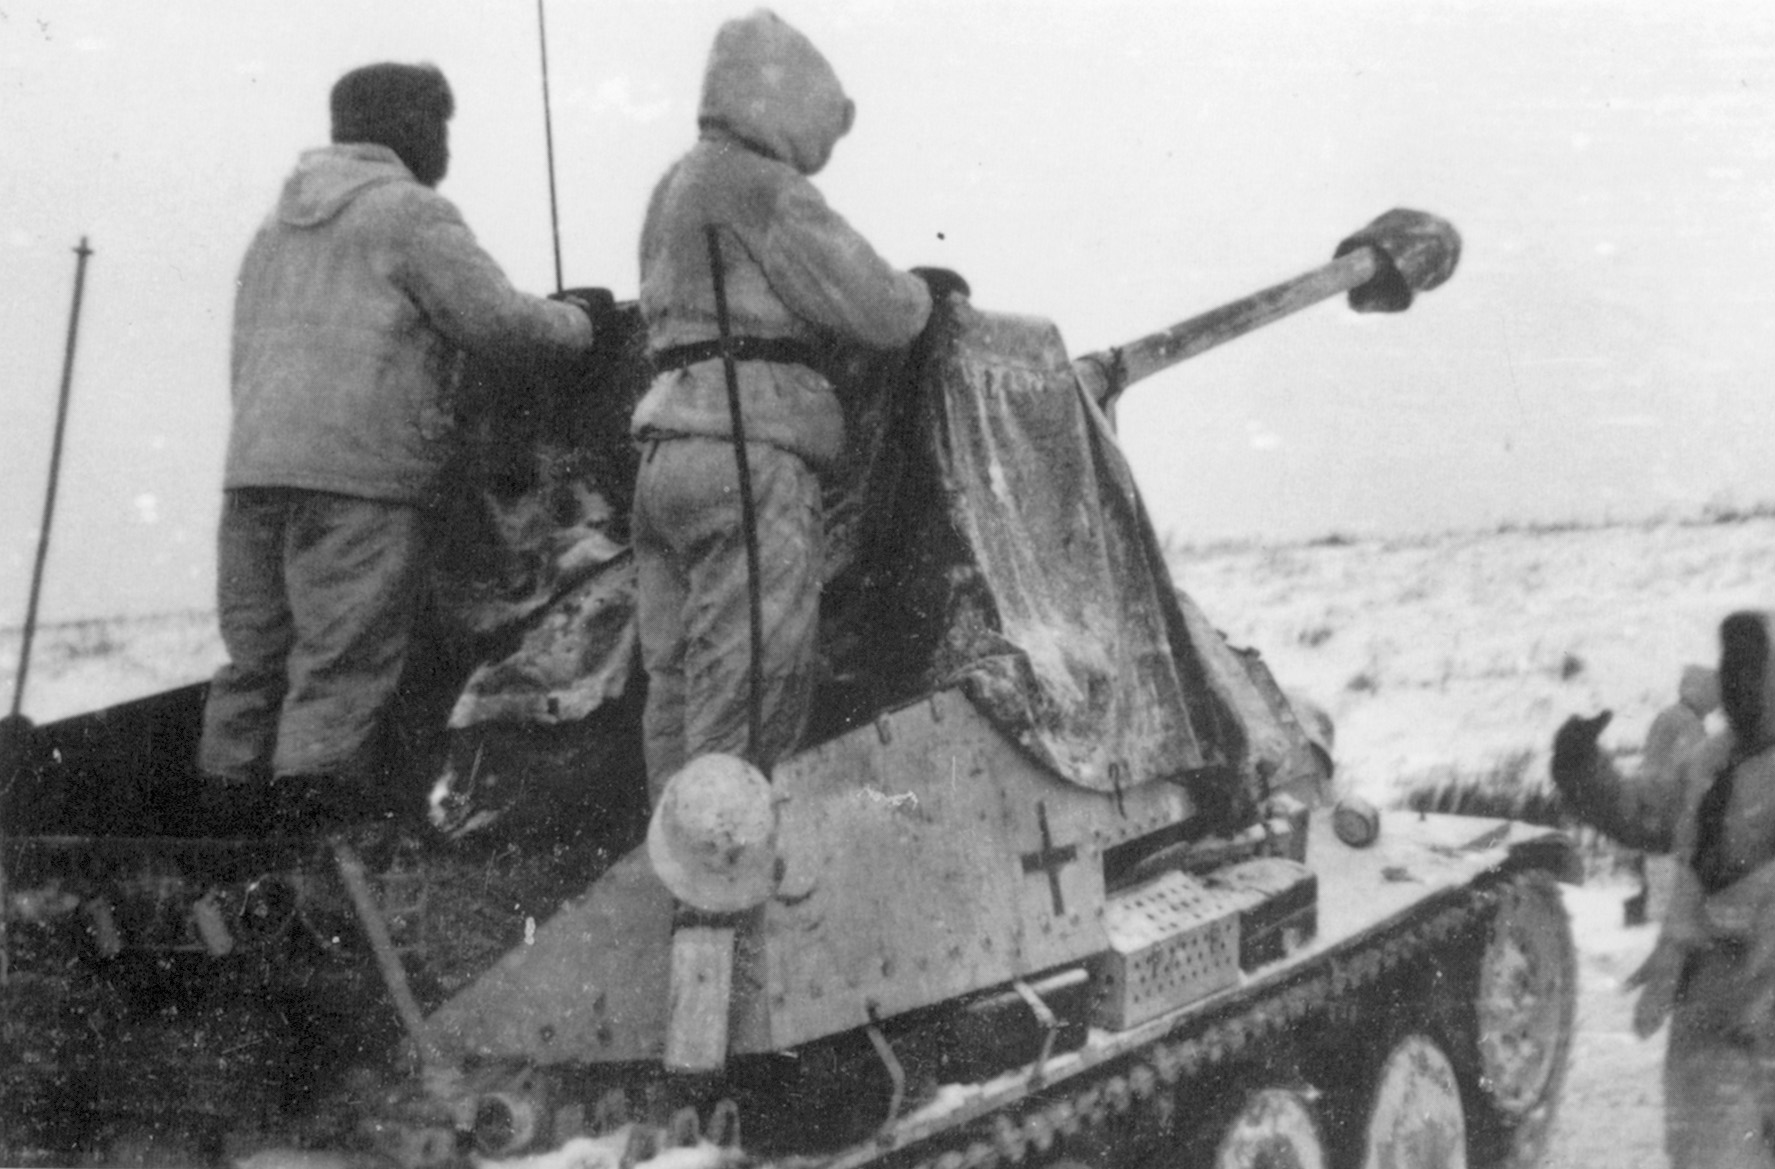 A self-propelled Sdkfz 138 assault gun of the 2nd SS Division Das Reich rolls into position during the winter of 1941 as two crewmen stare across the desolate, frozen landscape of Russia.